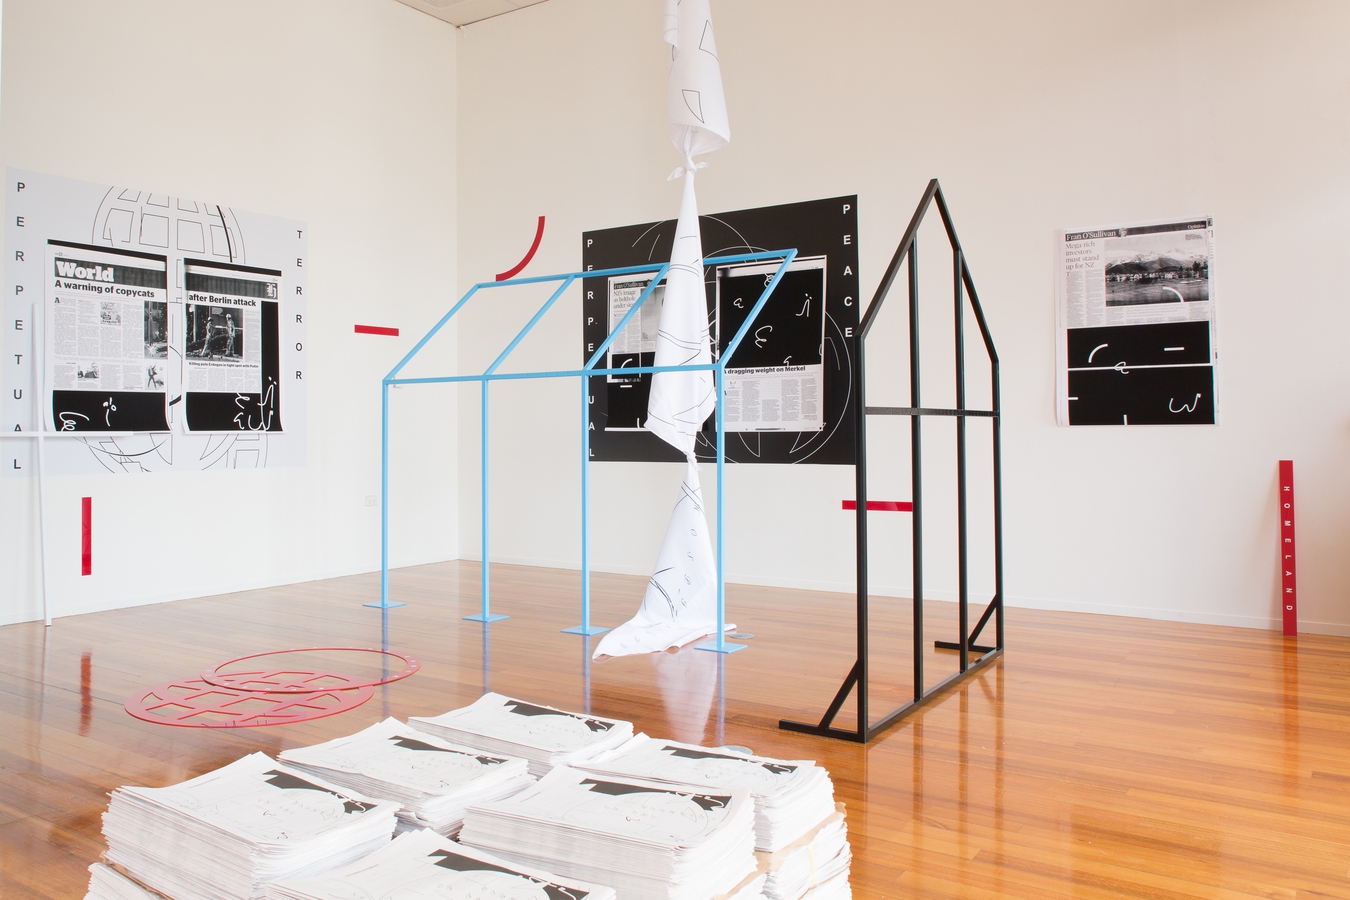 Image: Installation view of The Freedom of the Migrant, Matthew Galloway. Photo: Janneth Gil.